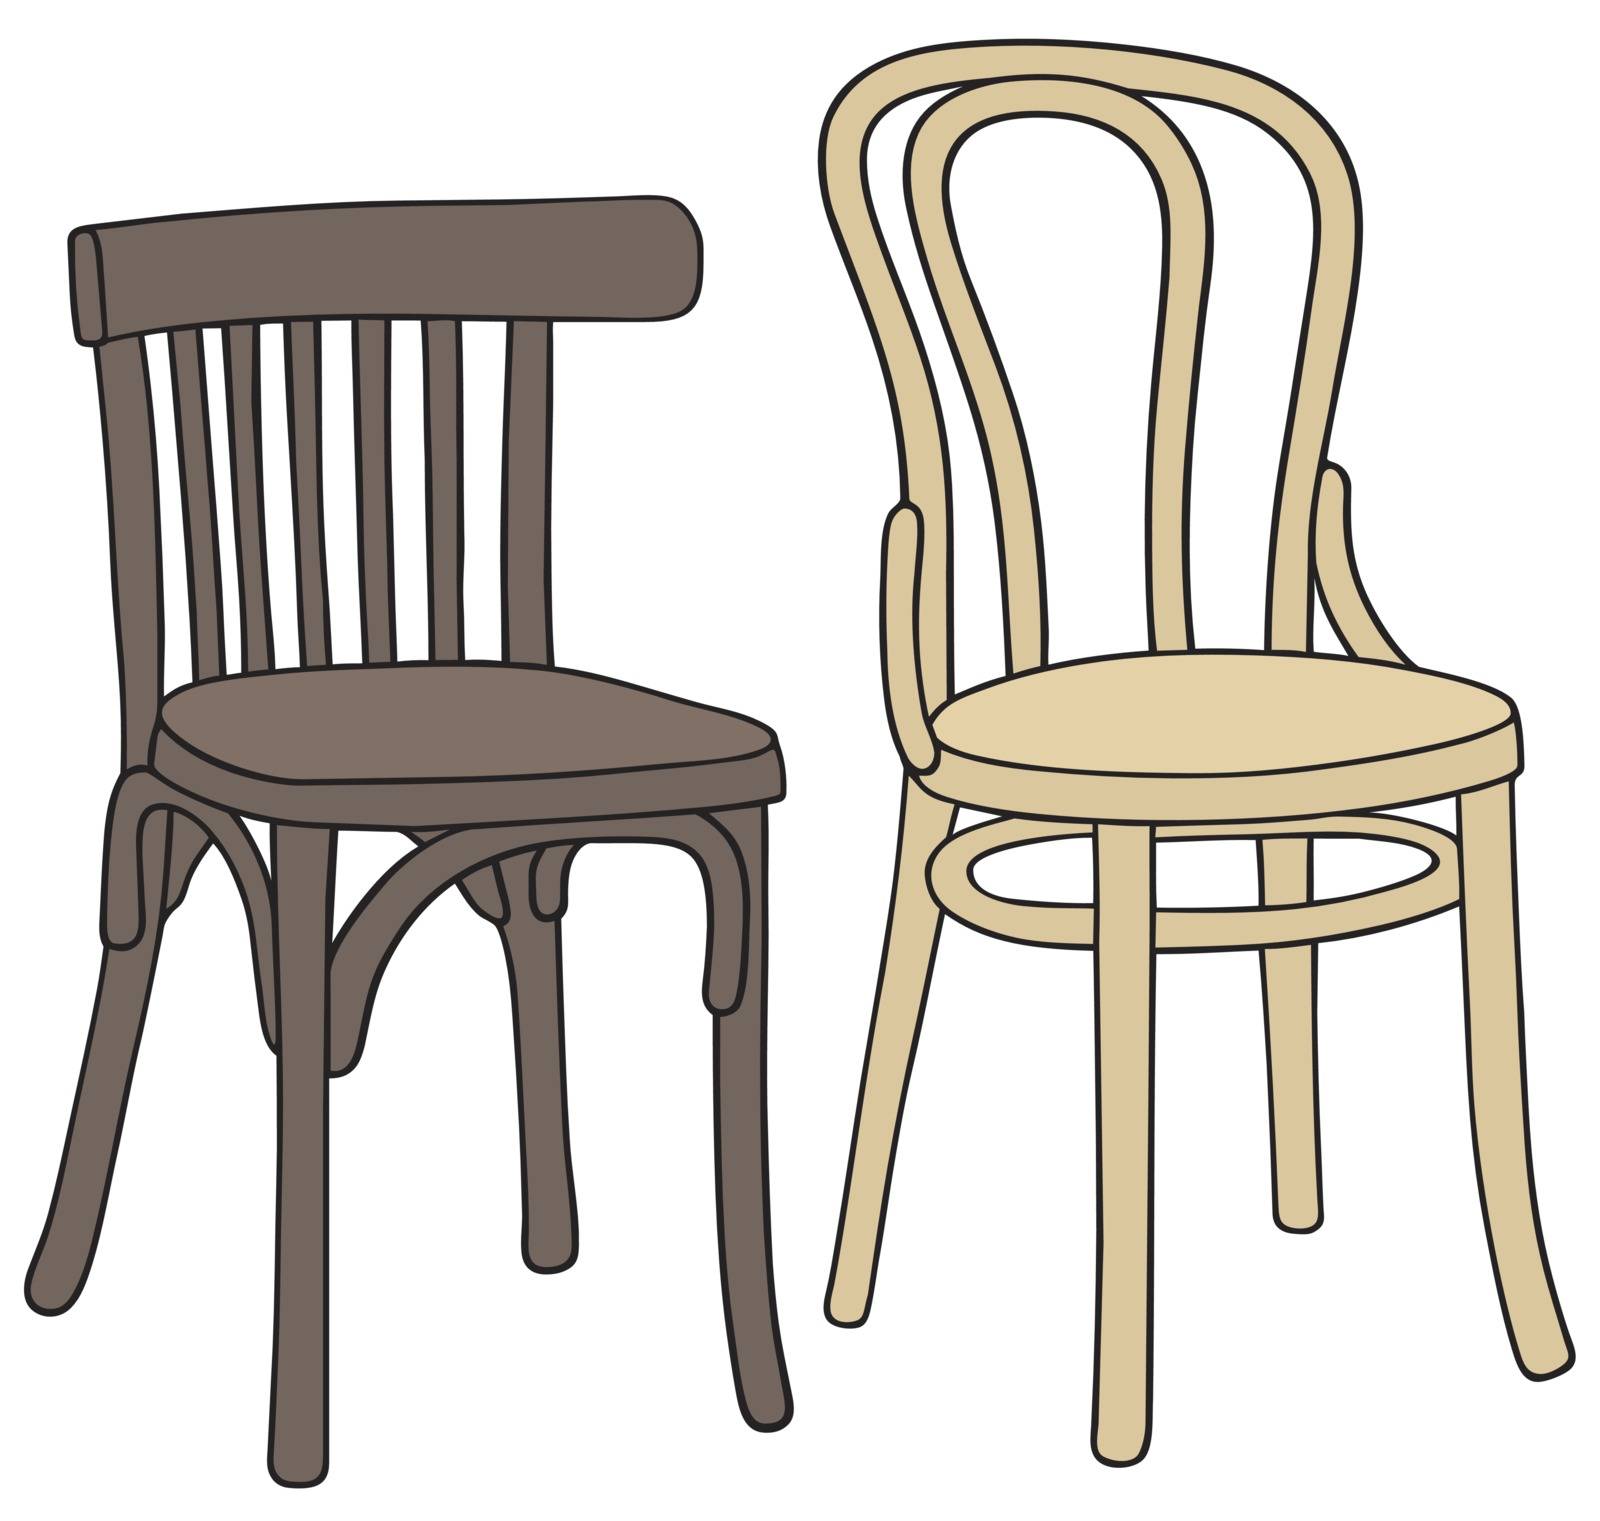 Hand drawing of two classic wooden chairs